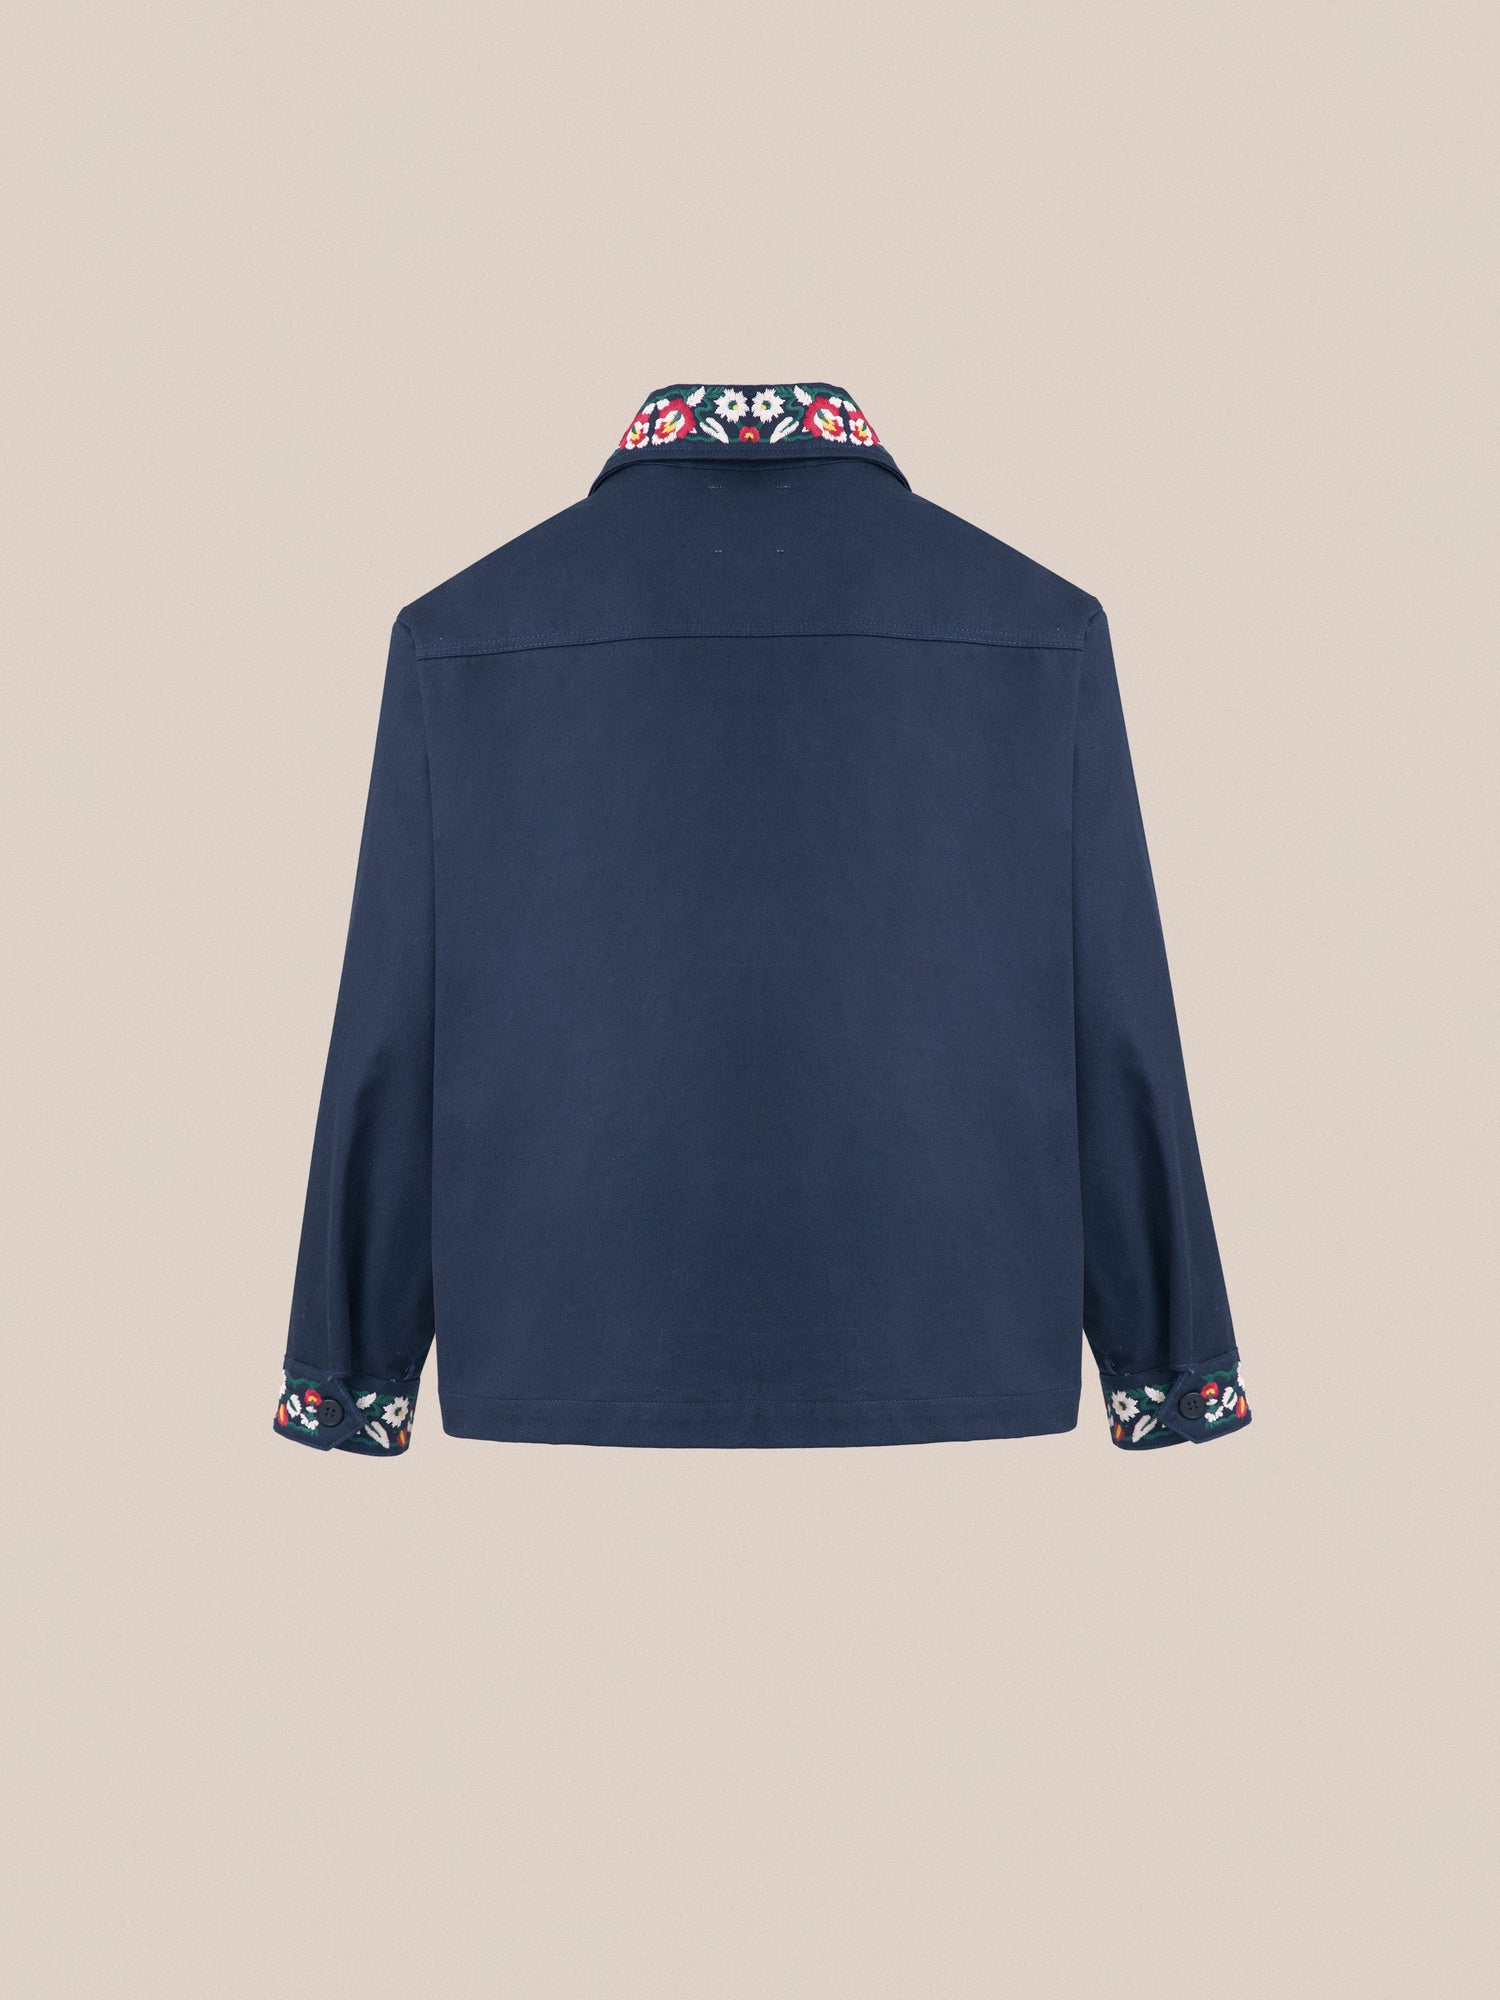 The back view of a Found Horse Equine Work Jacket with floral detailing and color blocking.